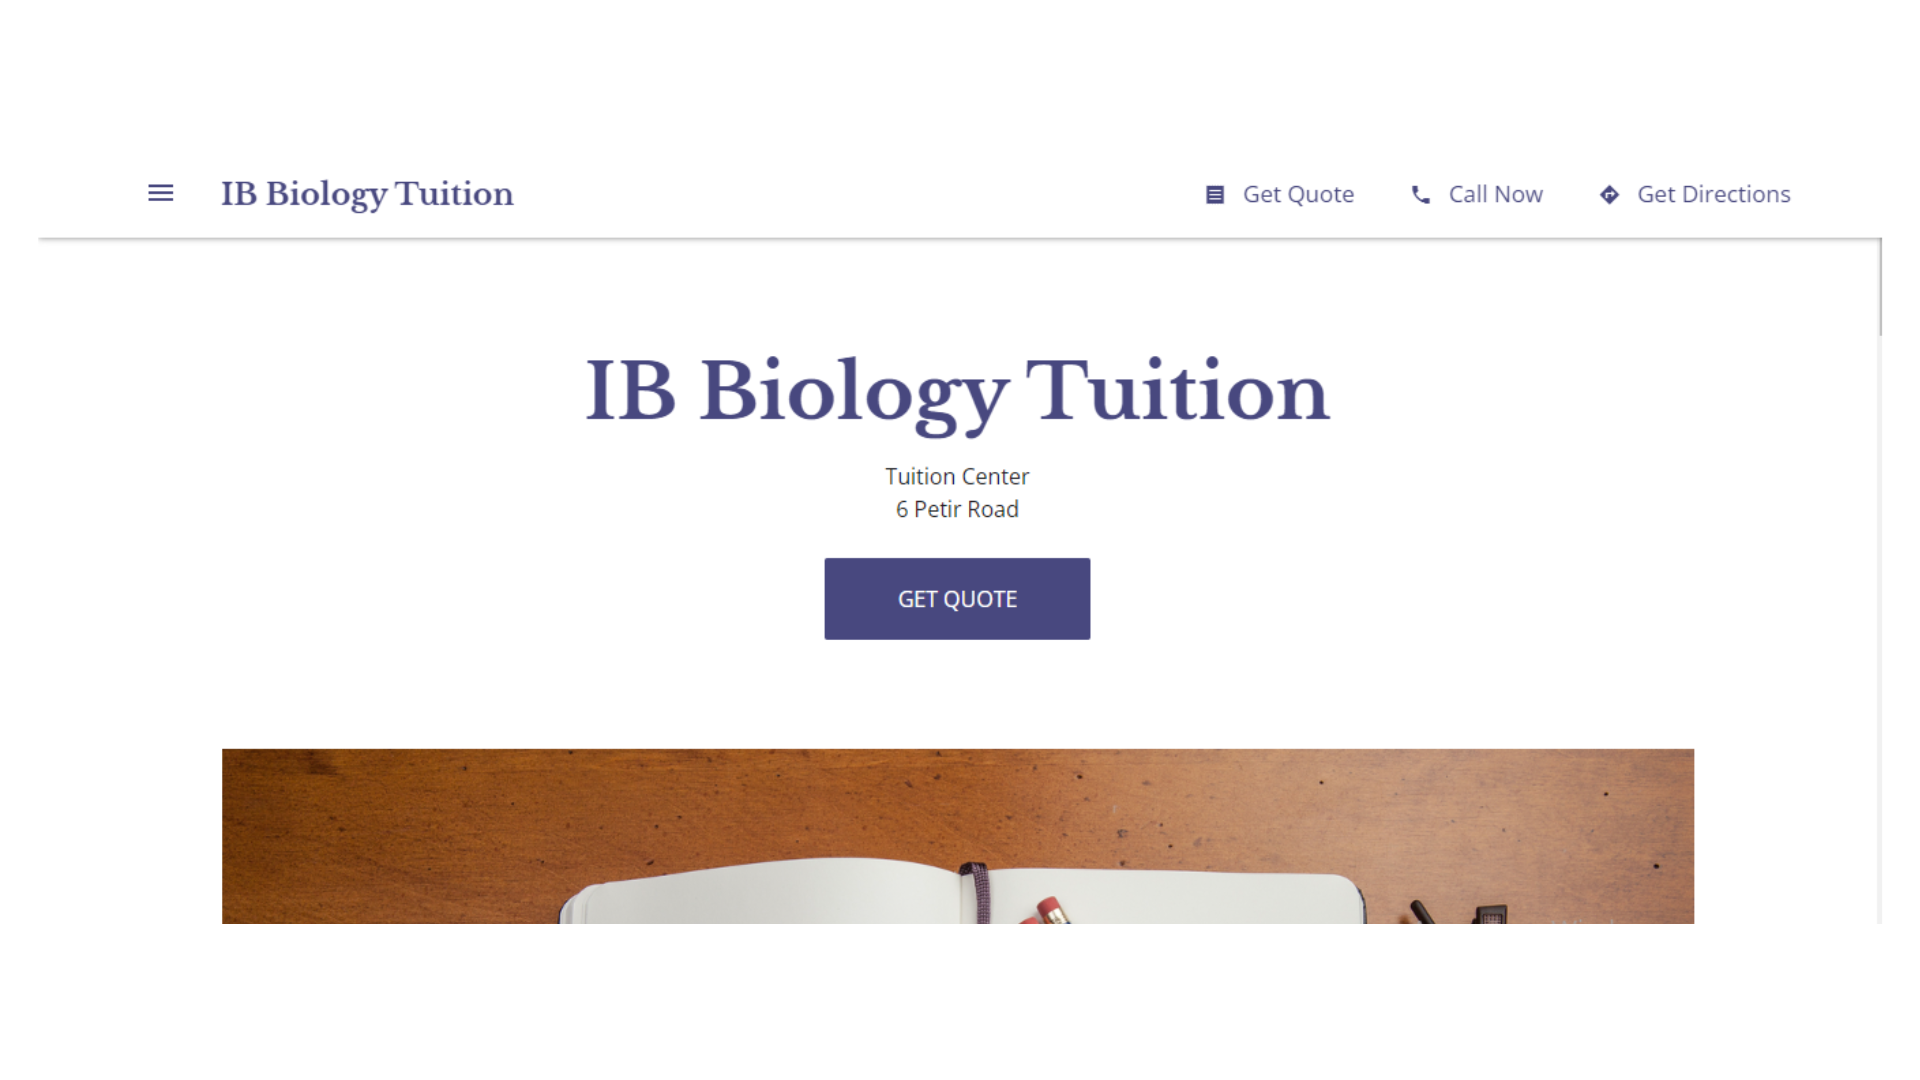 IB Biology Tuition is a tuition center that offers experienced and personalized coaching to students pursuing International Baccalaureate (IB) Biology and IGCSE Biology.